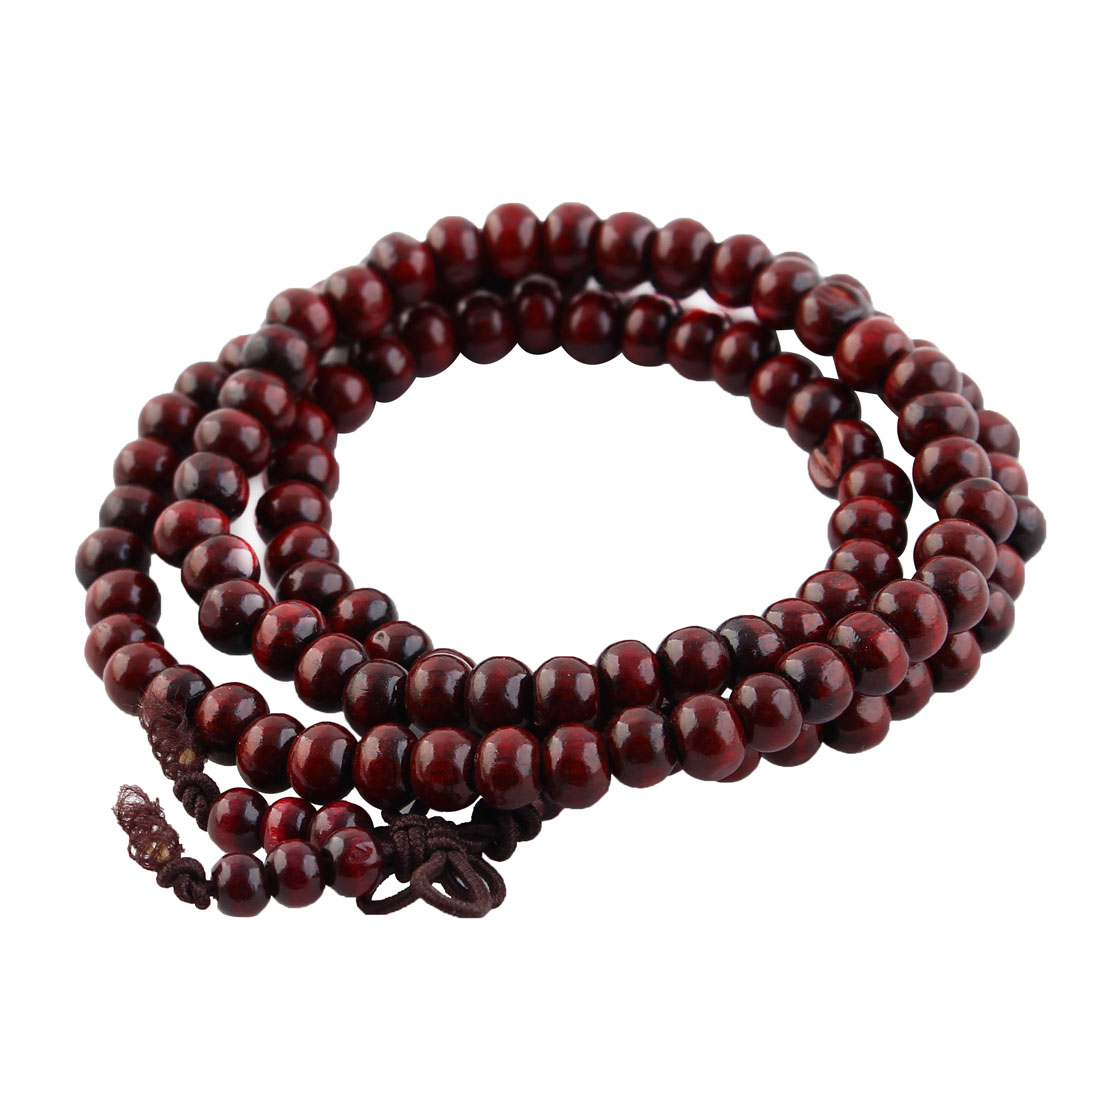 Unique Bargains Tibet 6mm Wood Buddhist Rosary Prayer Beads Elastic Mala Necklace Brown